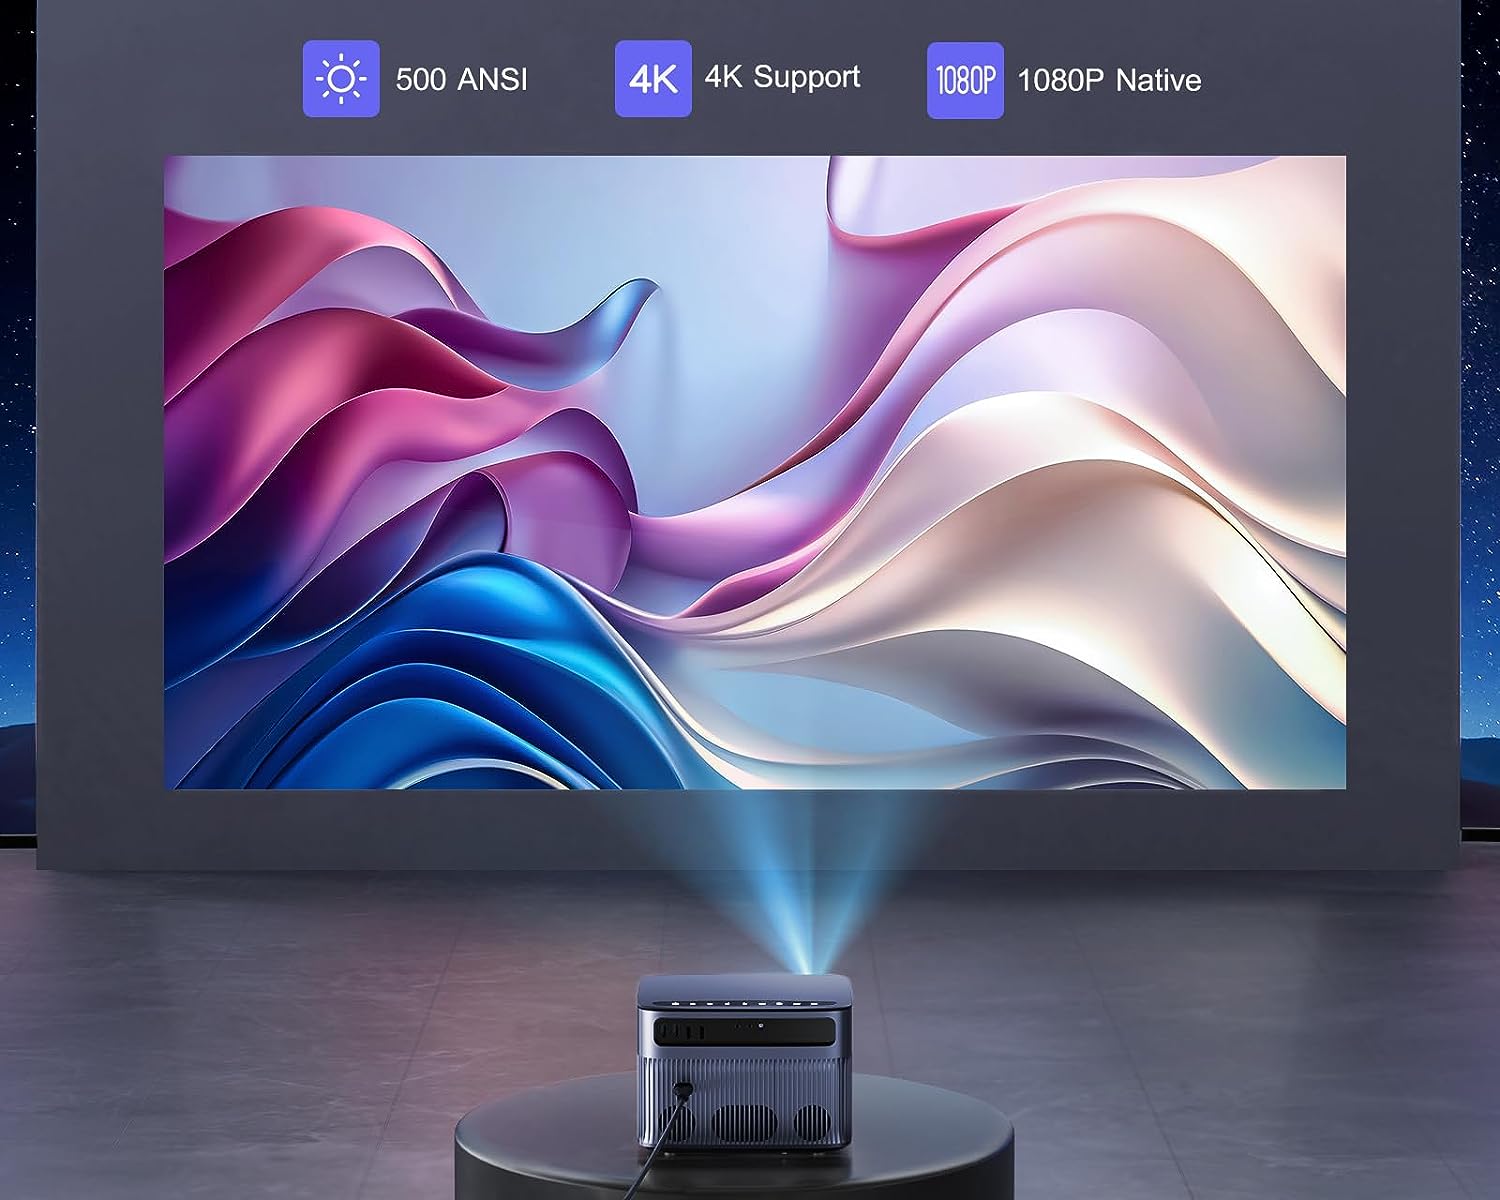 WiMiUS P64 Native 1080P Projector, Your Ultimate Home Theater Upgraded!